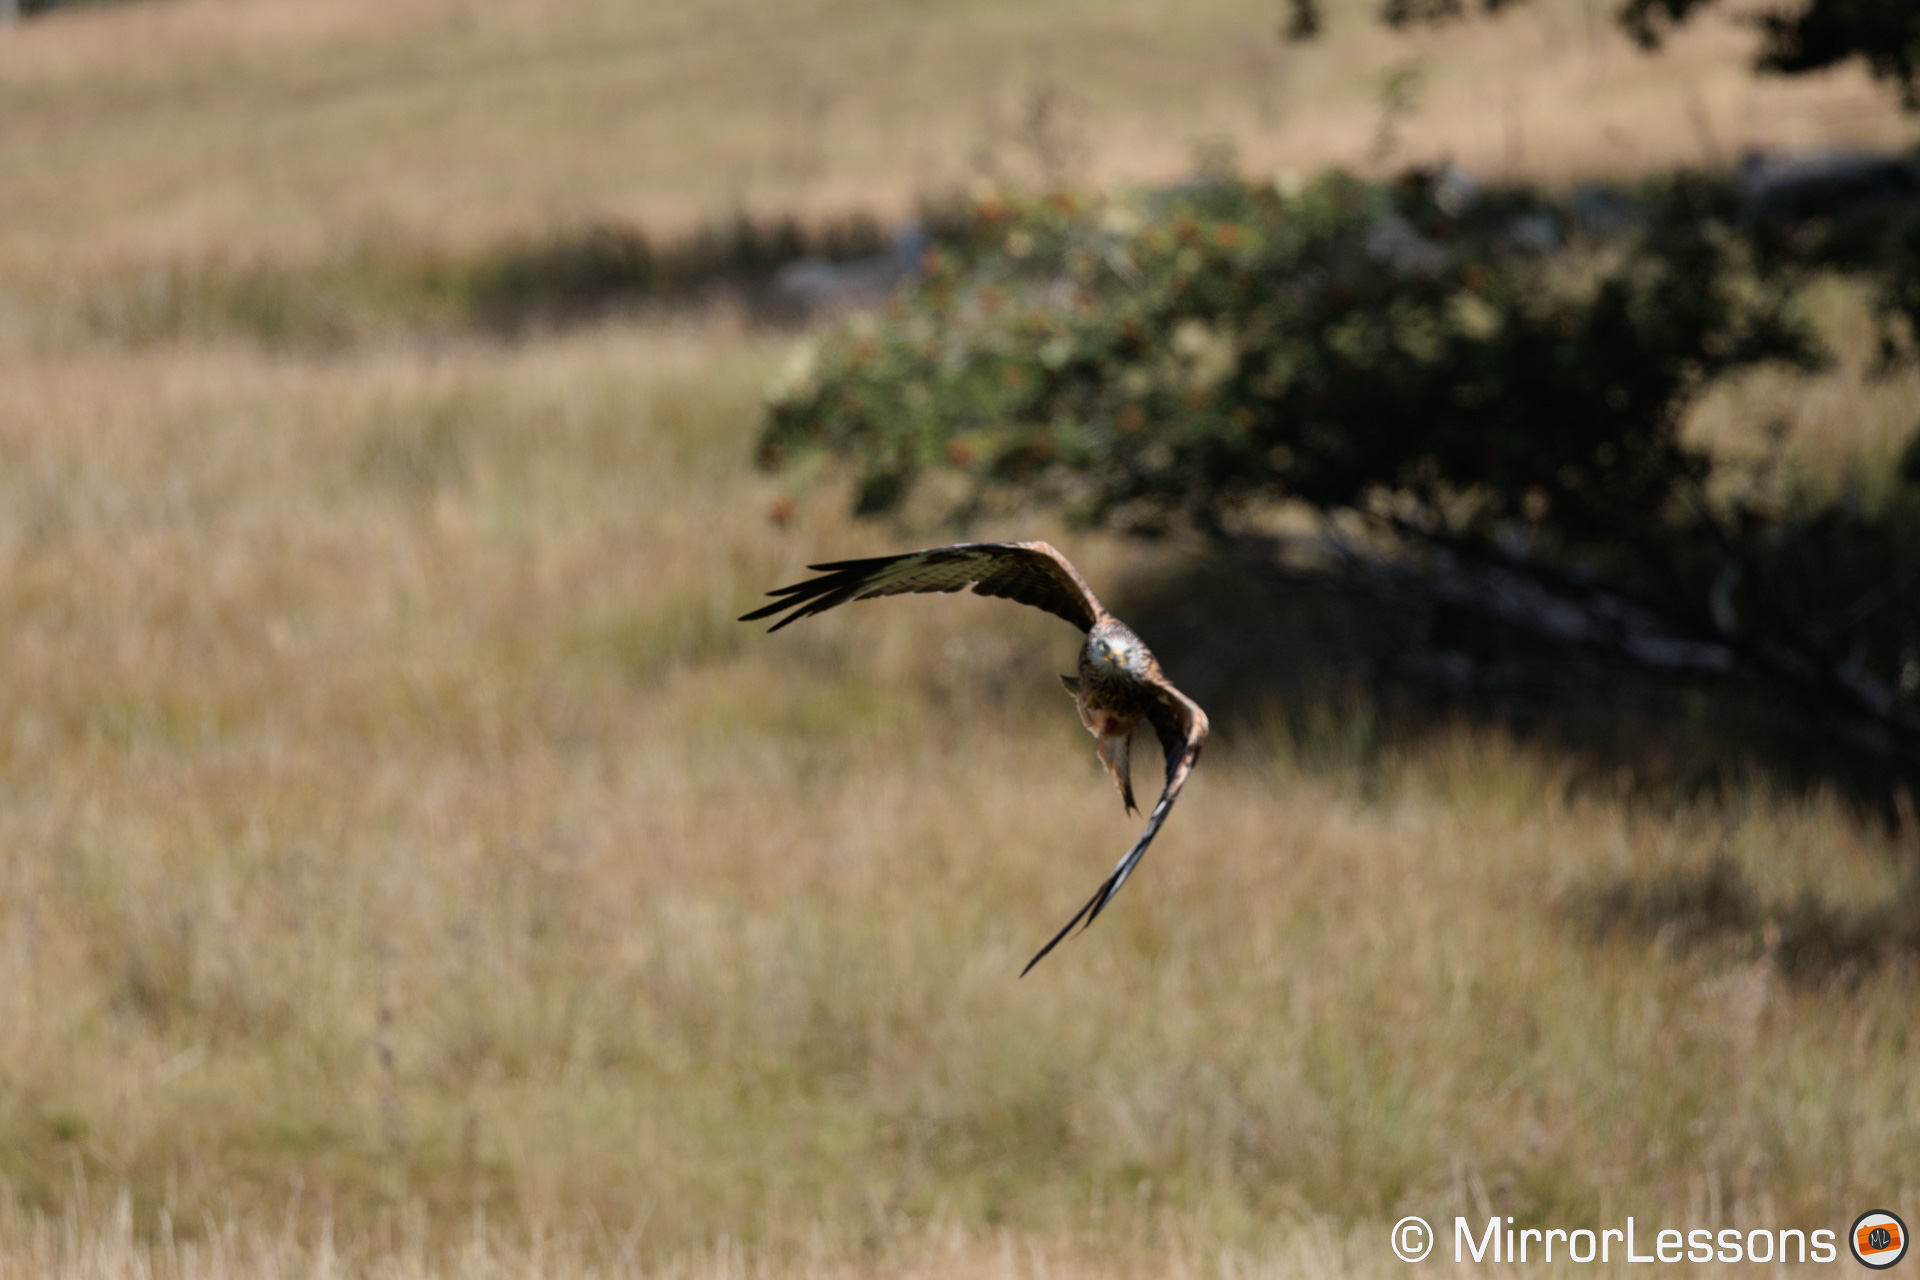 Red kite out of focus